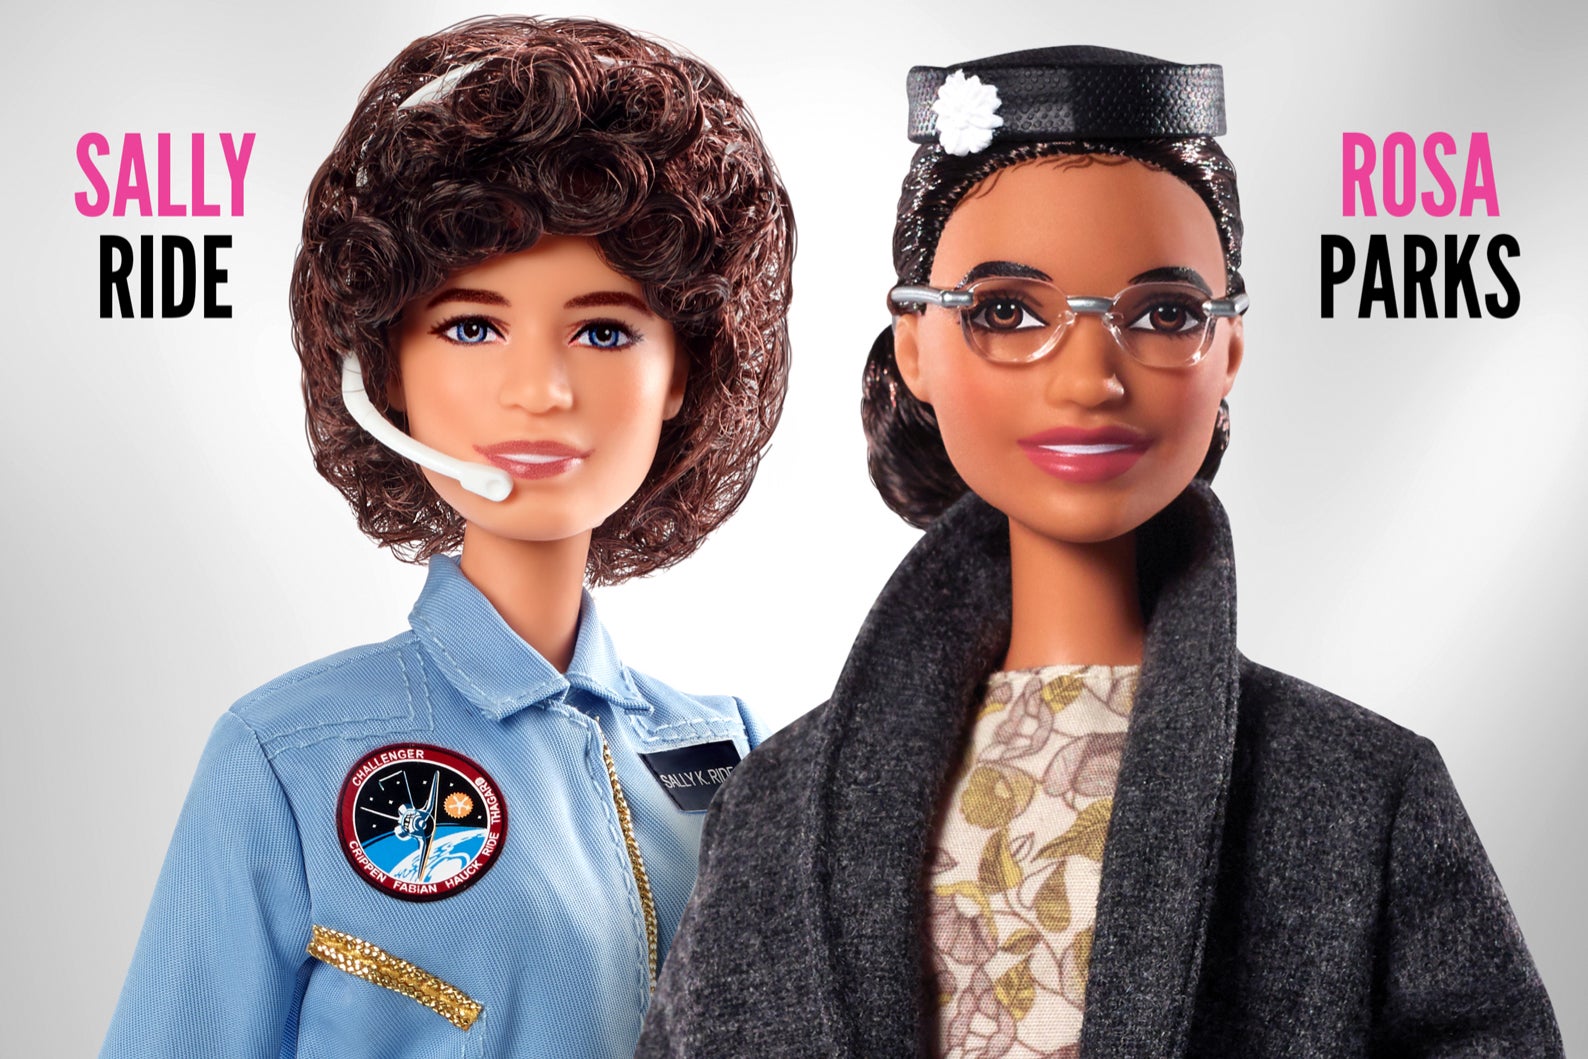 Sally Ride and Rosa Parks